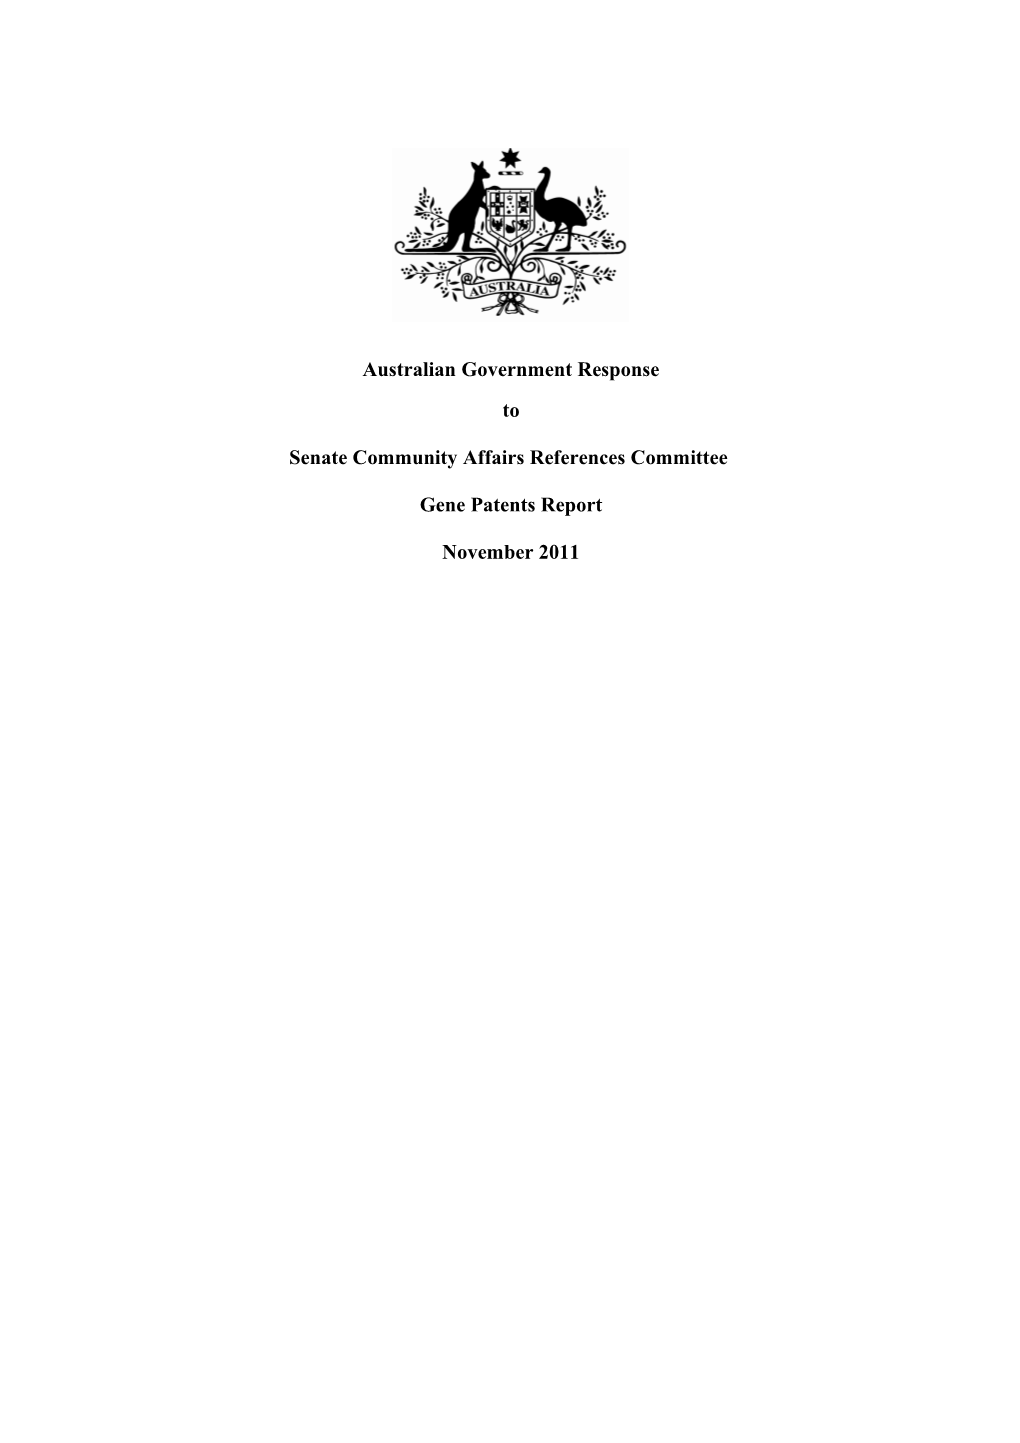 Australian Government Response to Senate Community Affairs References Committee S Report